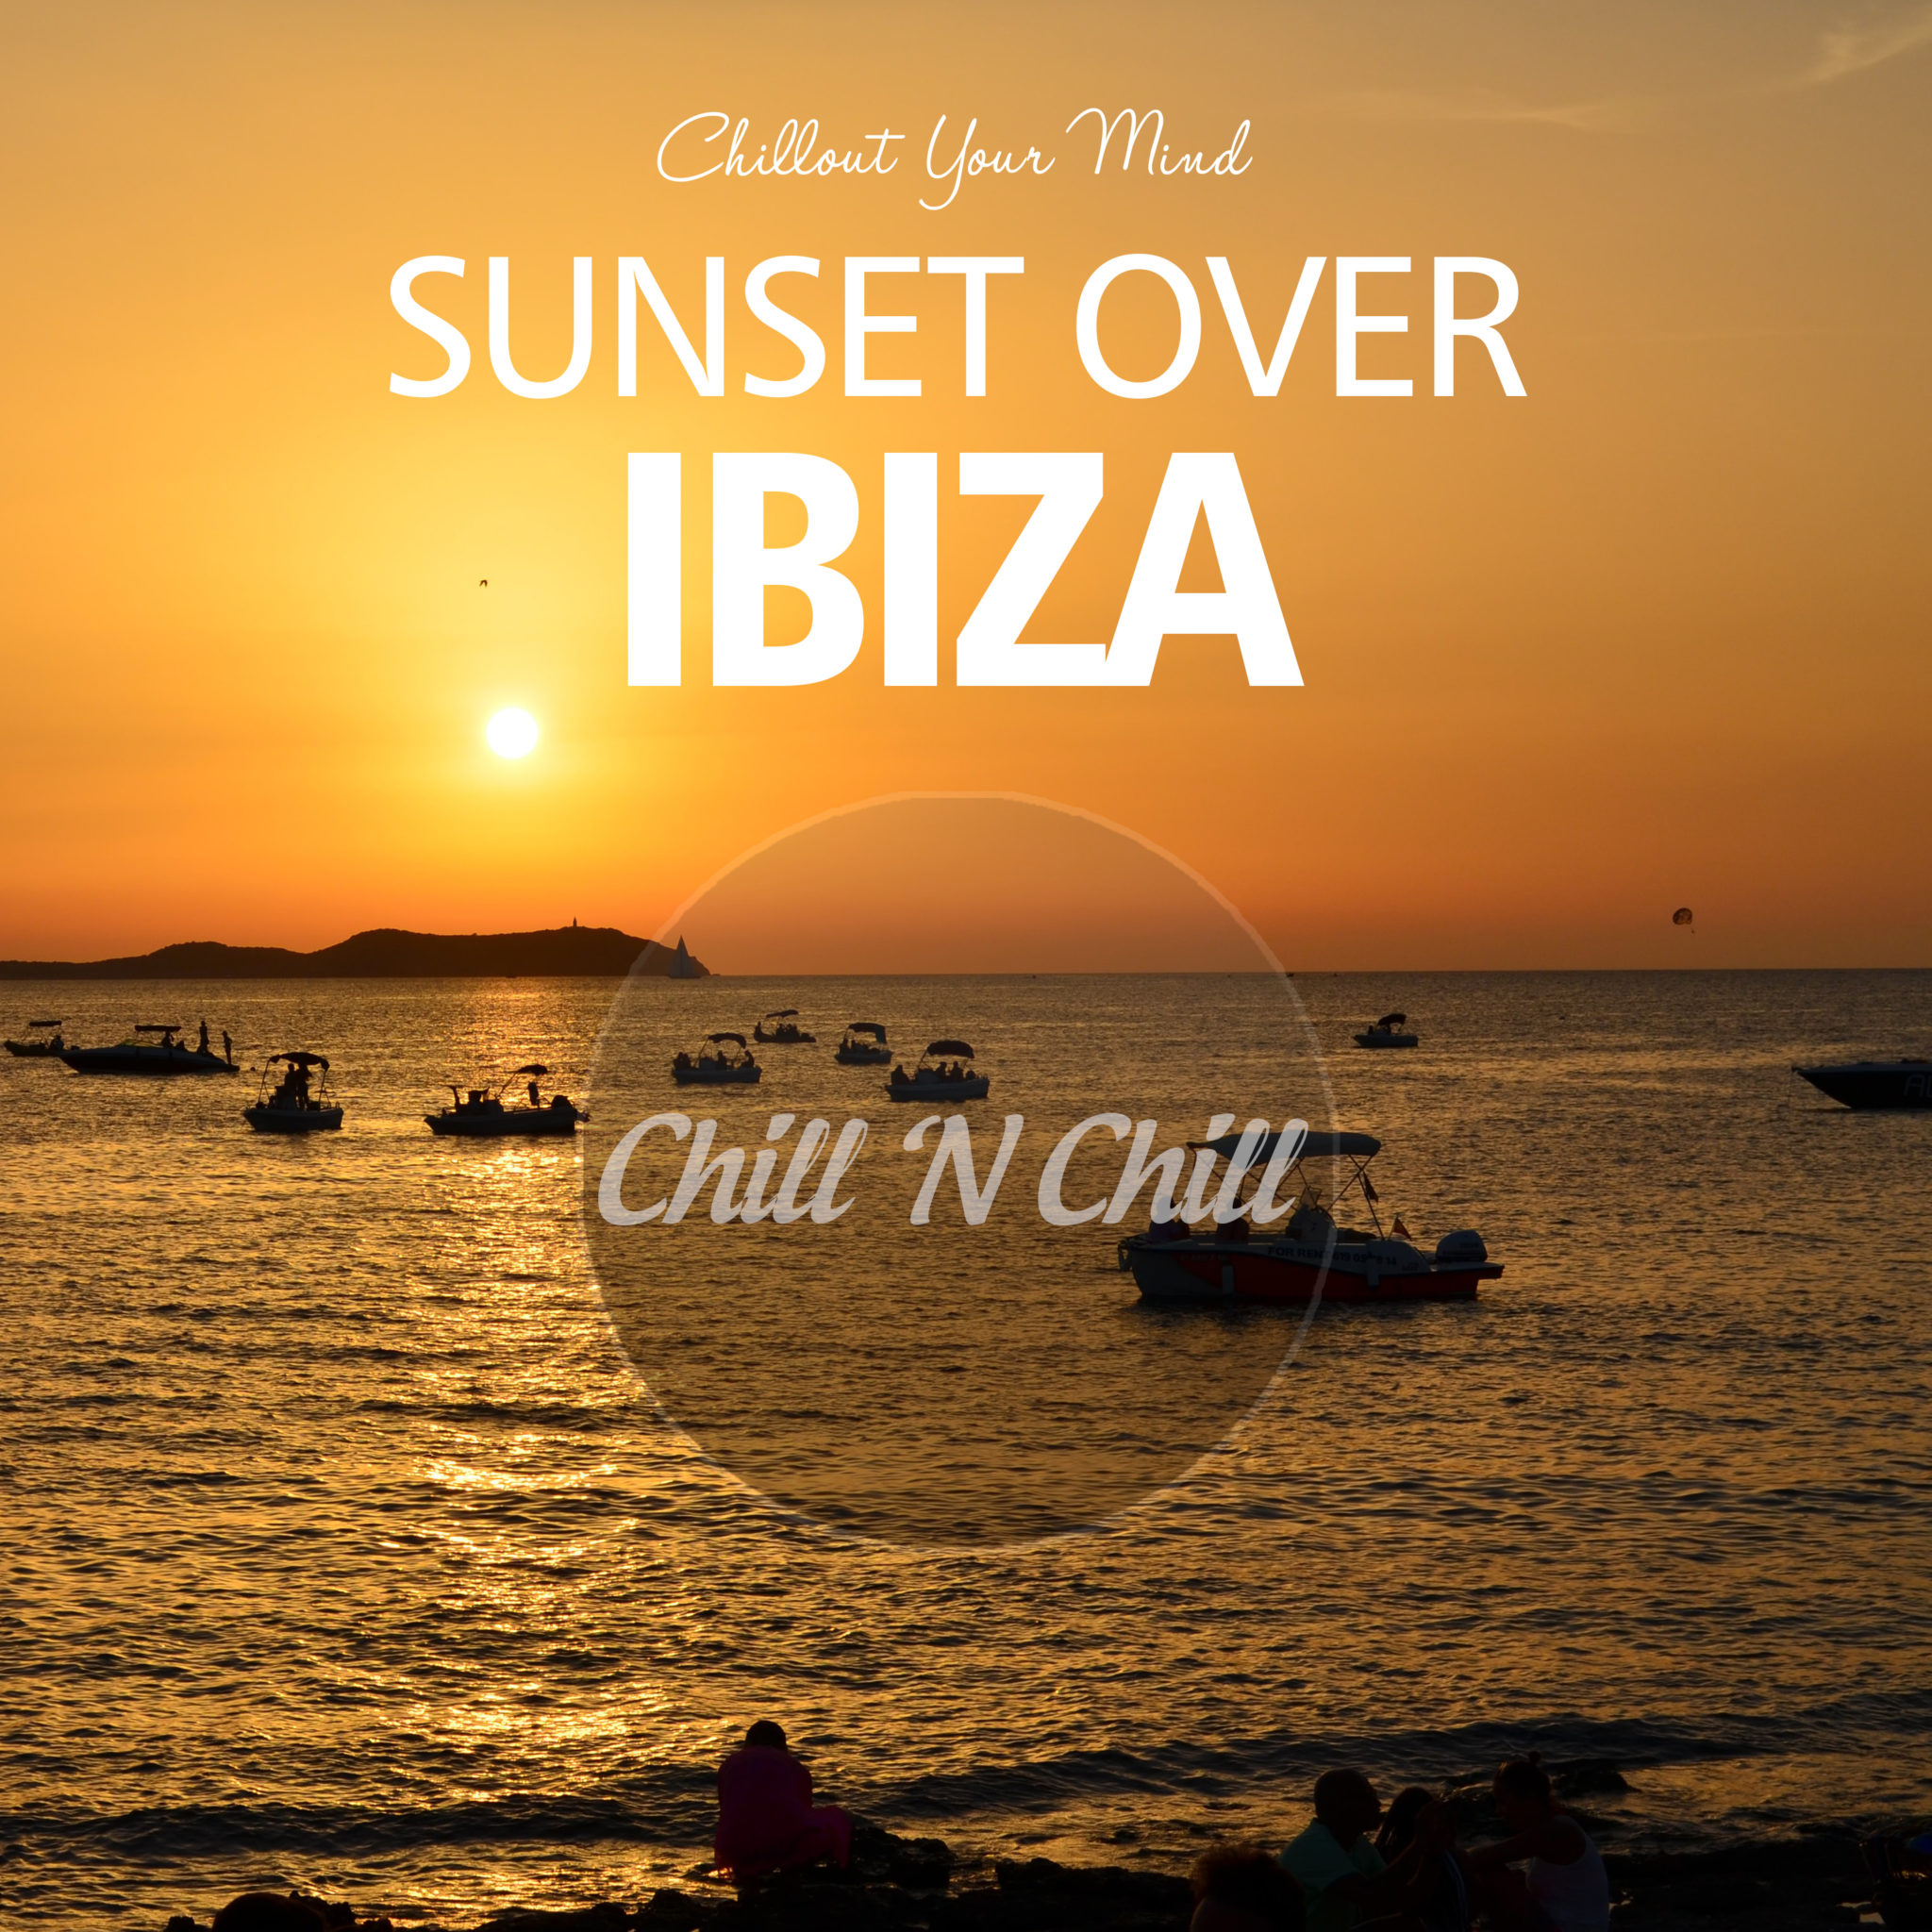 Ibiza Chillout 4 1998. Ibiza Chillout 4 1995. Chillout Ibiza Art. Chill n